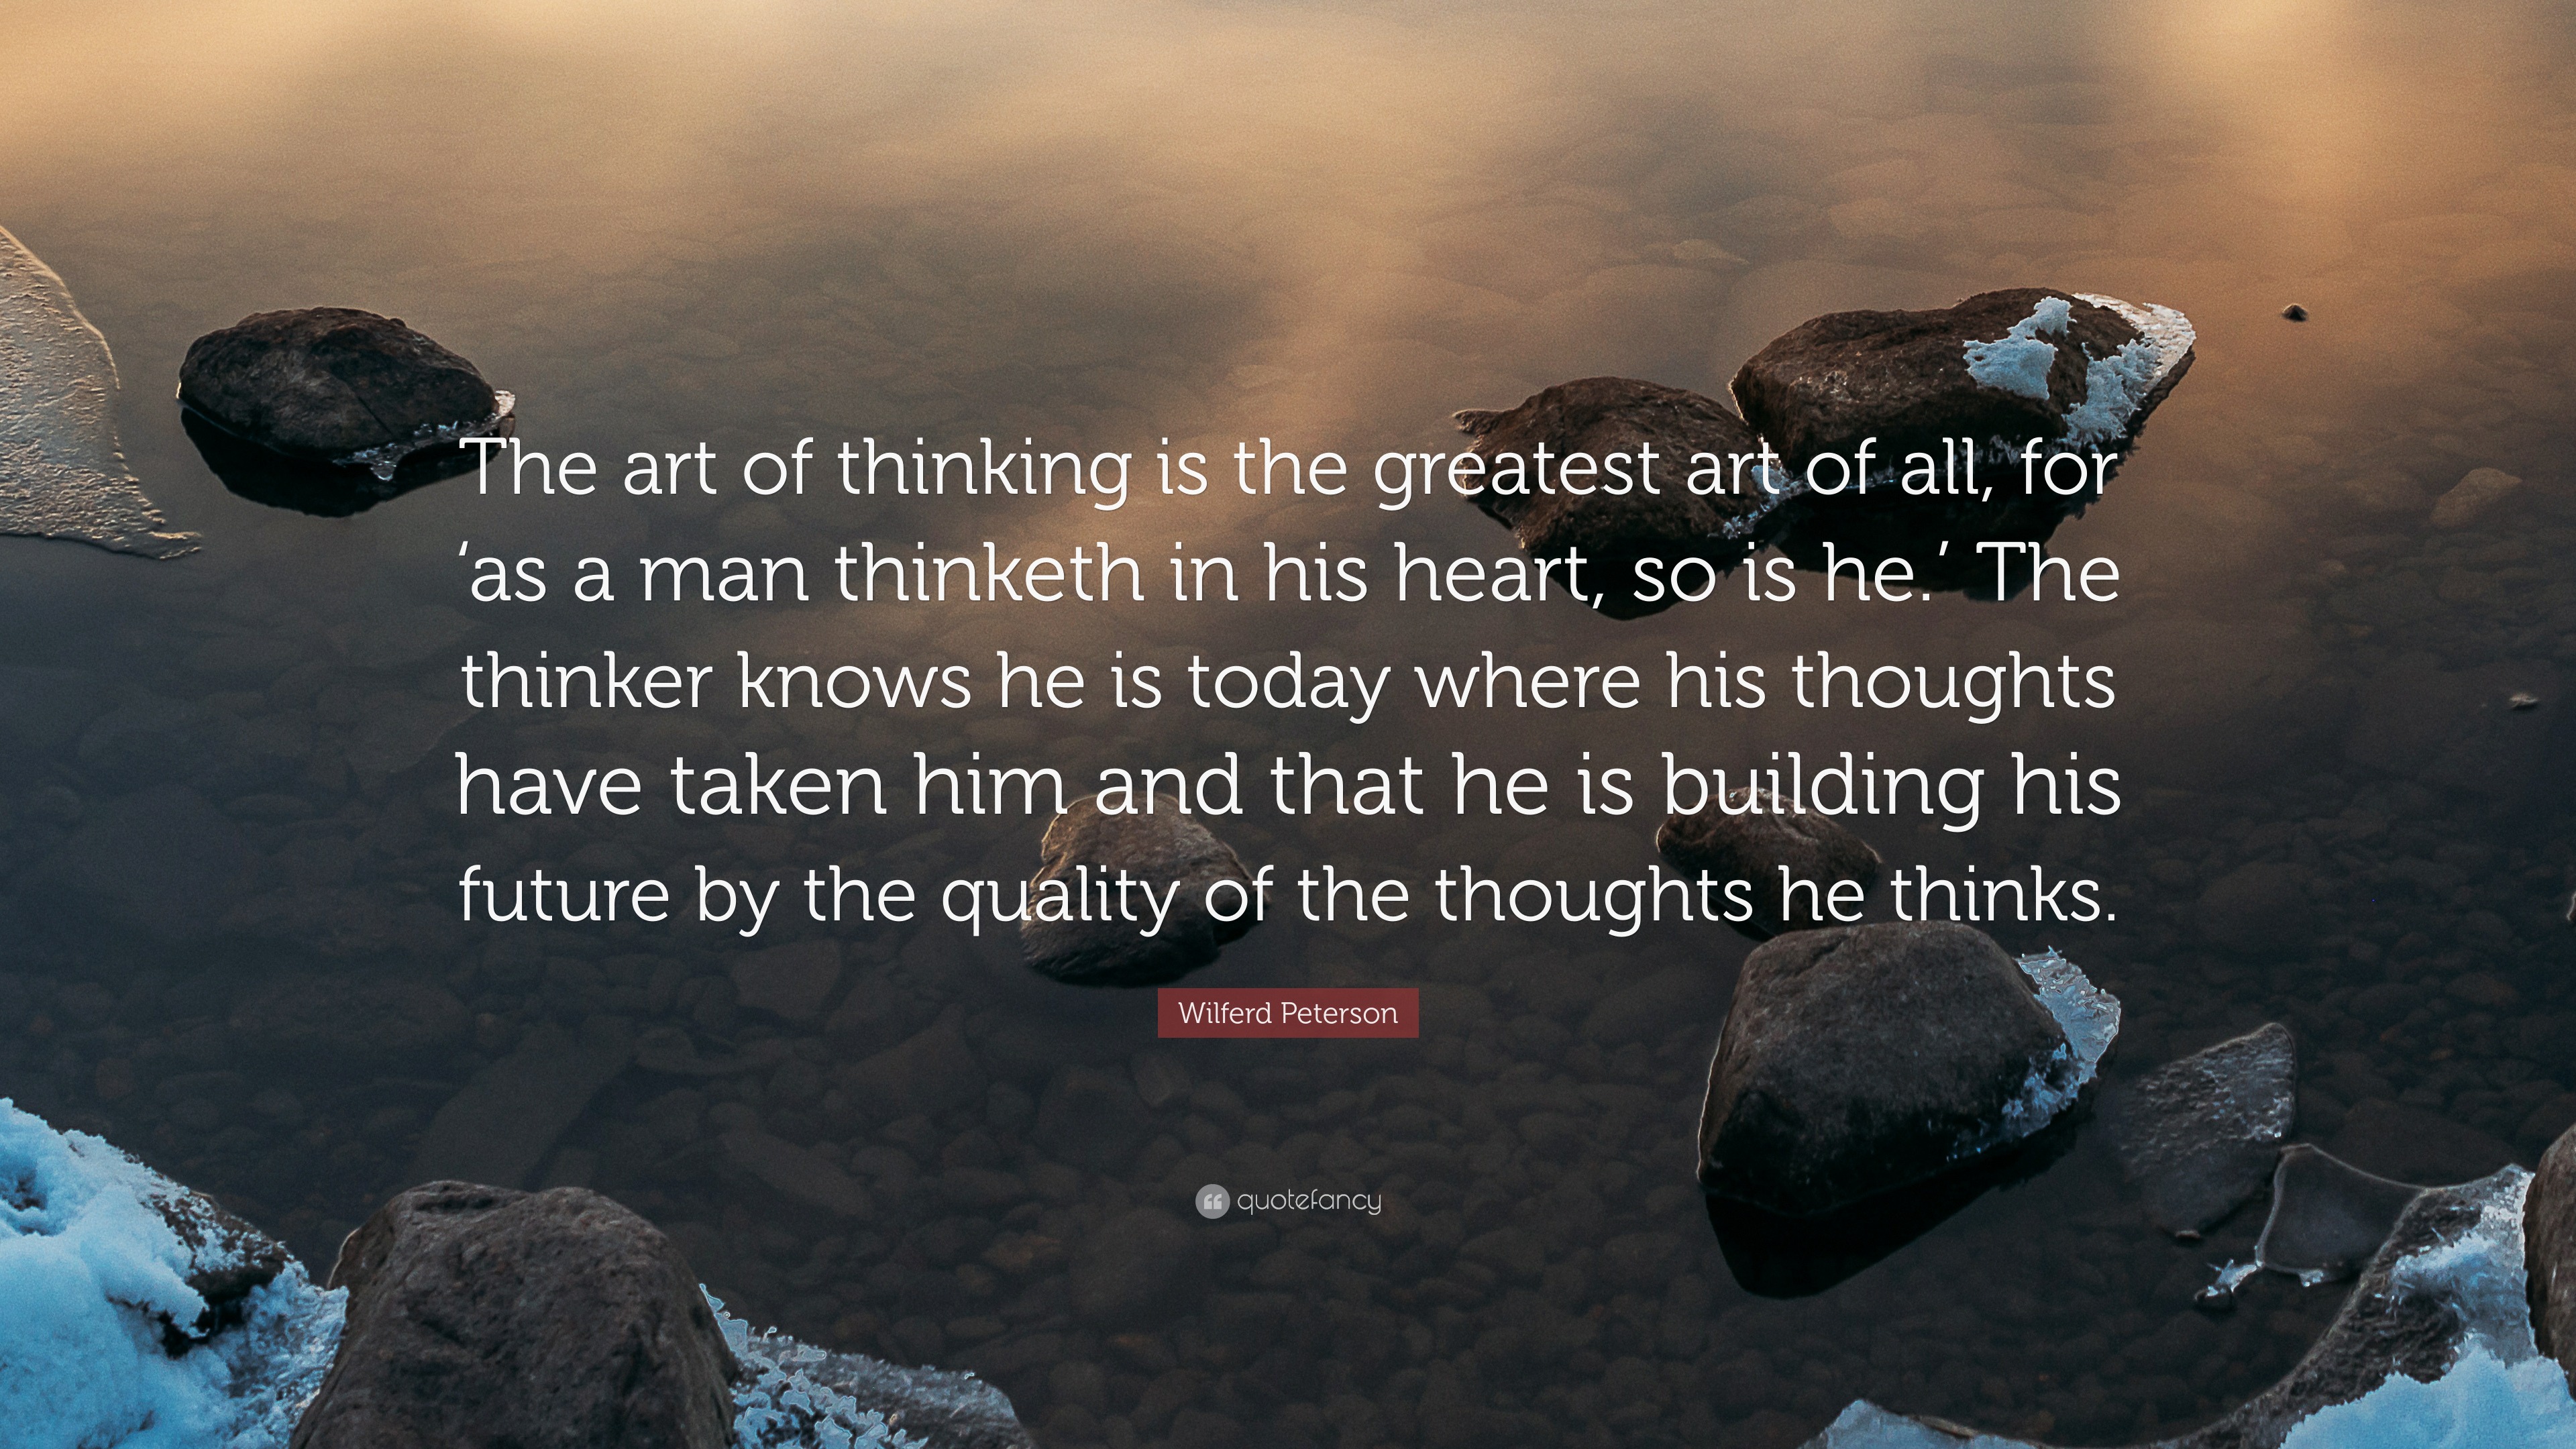 Wilferd Peterson Quote: “The art of thinking is the greatest art of all